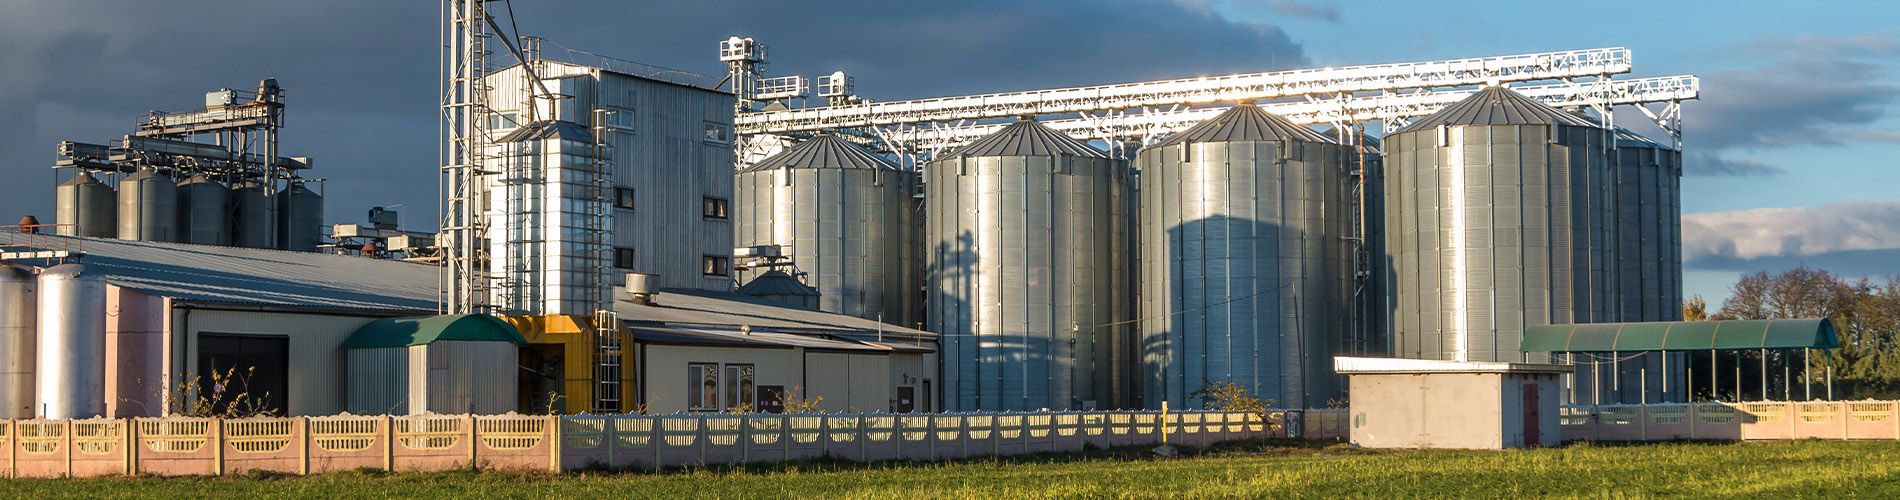 Grain silos lined up next to other agricultural equipment and buildings.